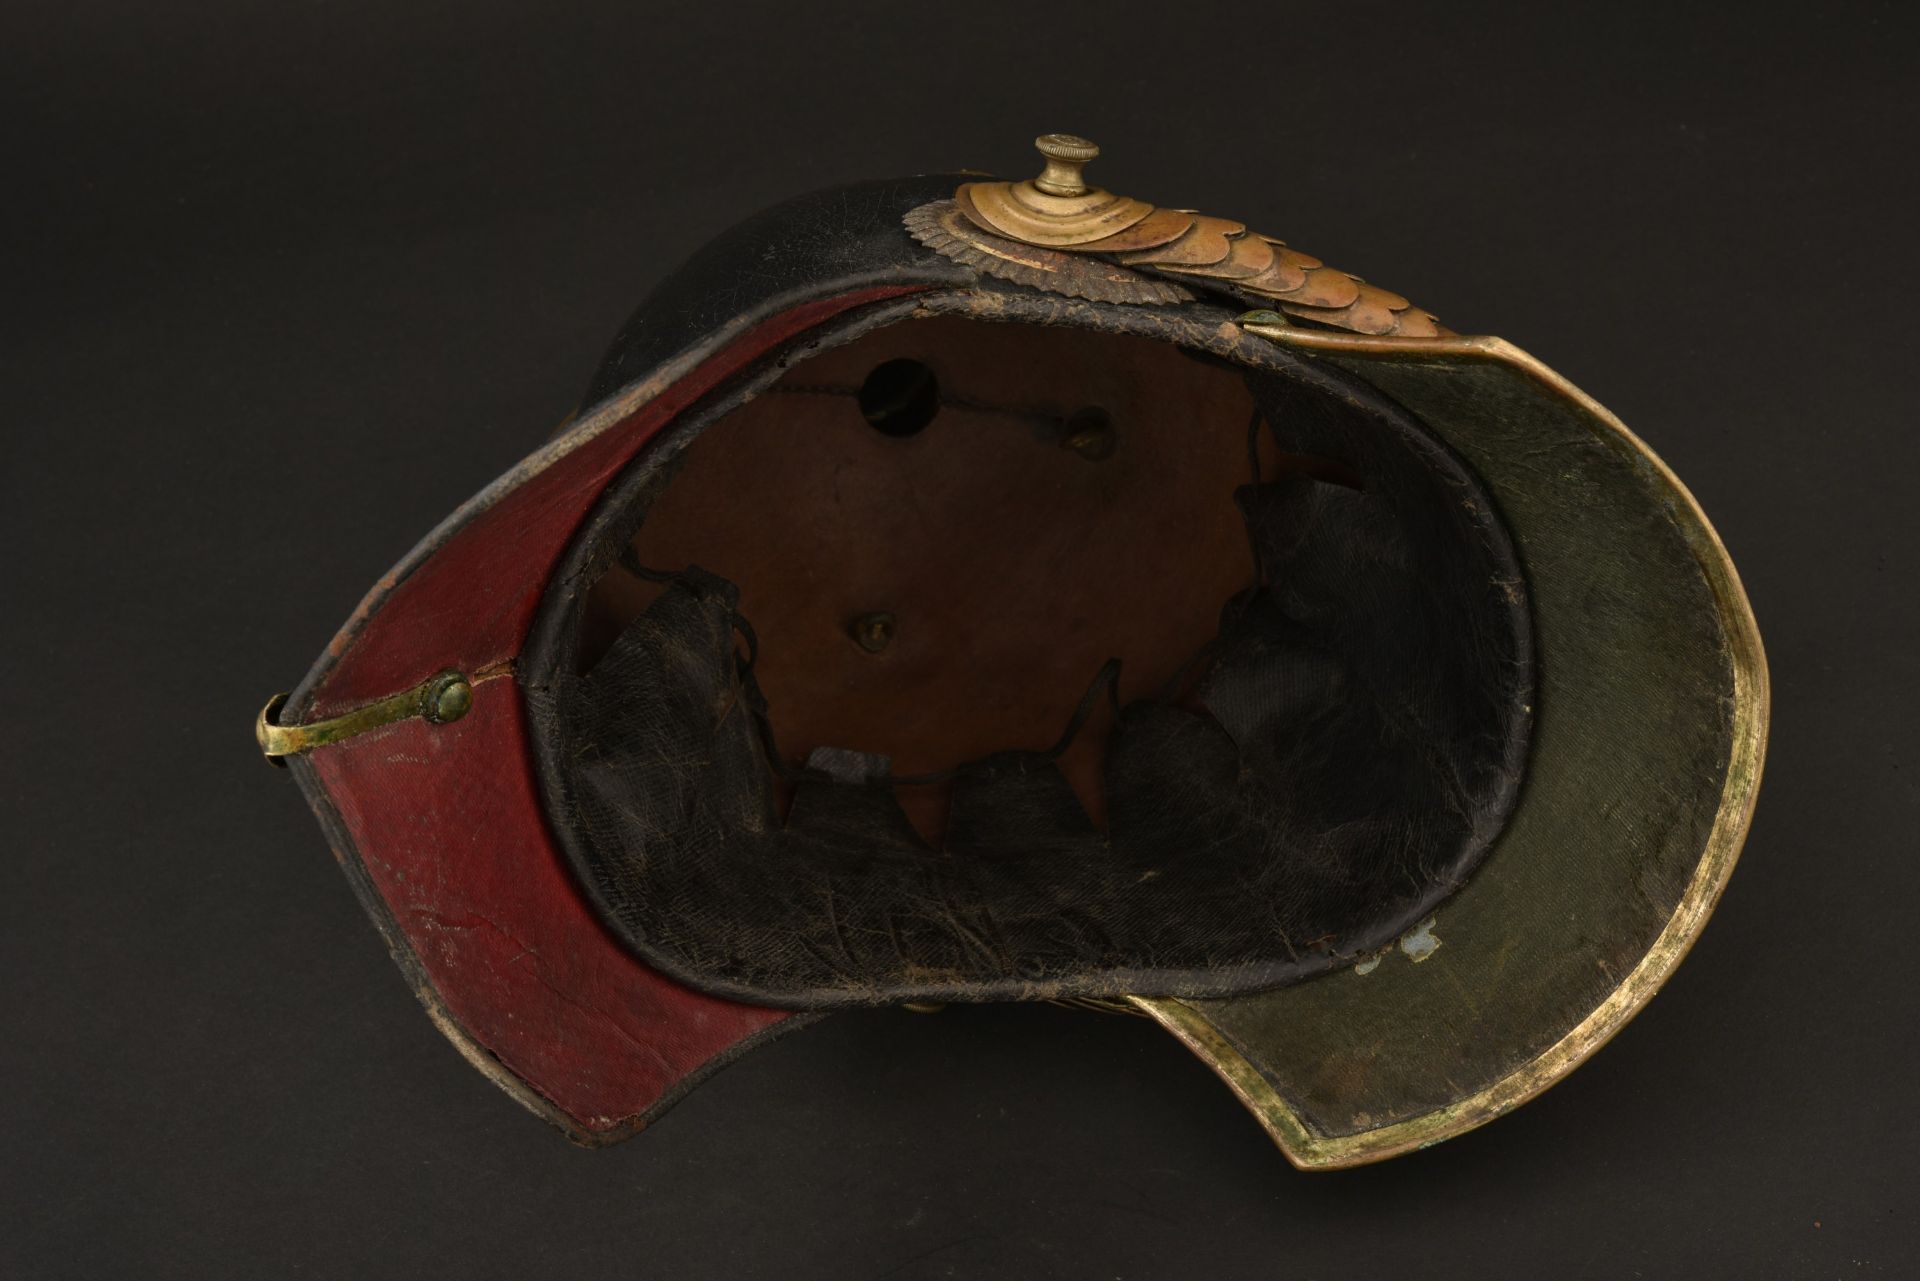 Casque a pointe d officier prussien 1842. Early prussian officer spiked helmet pattern 1842. Offizie - Image 4 of 4